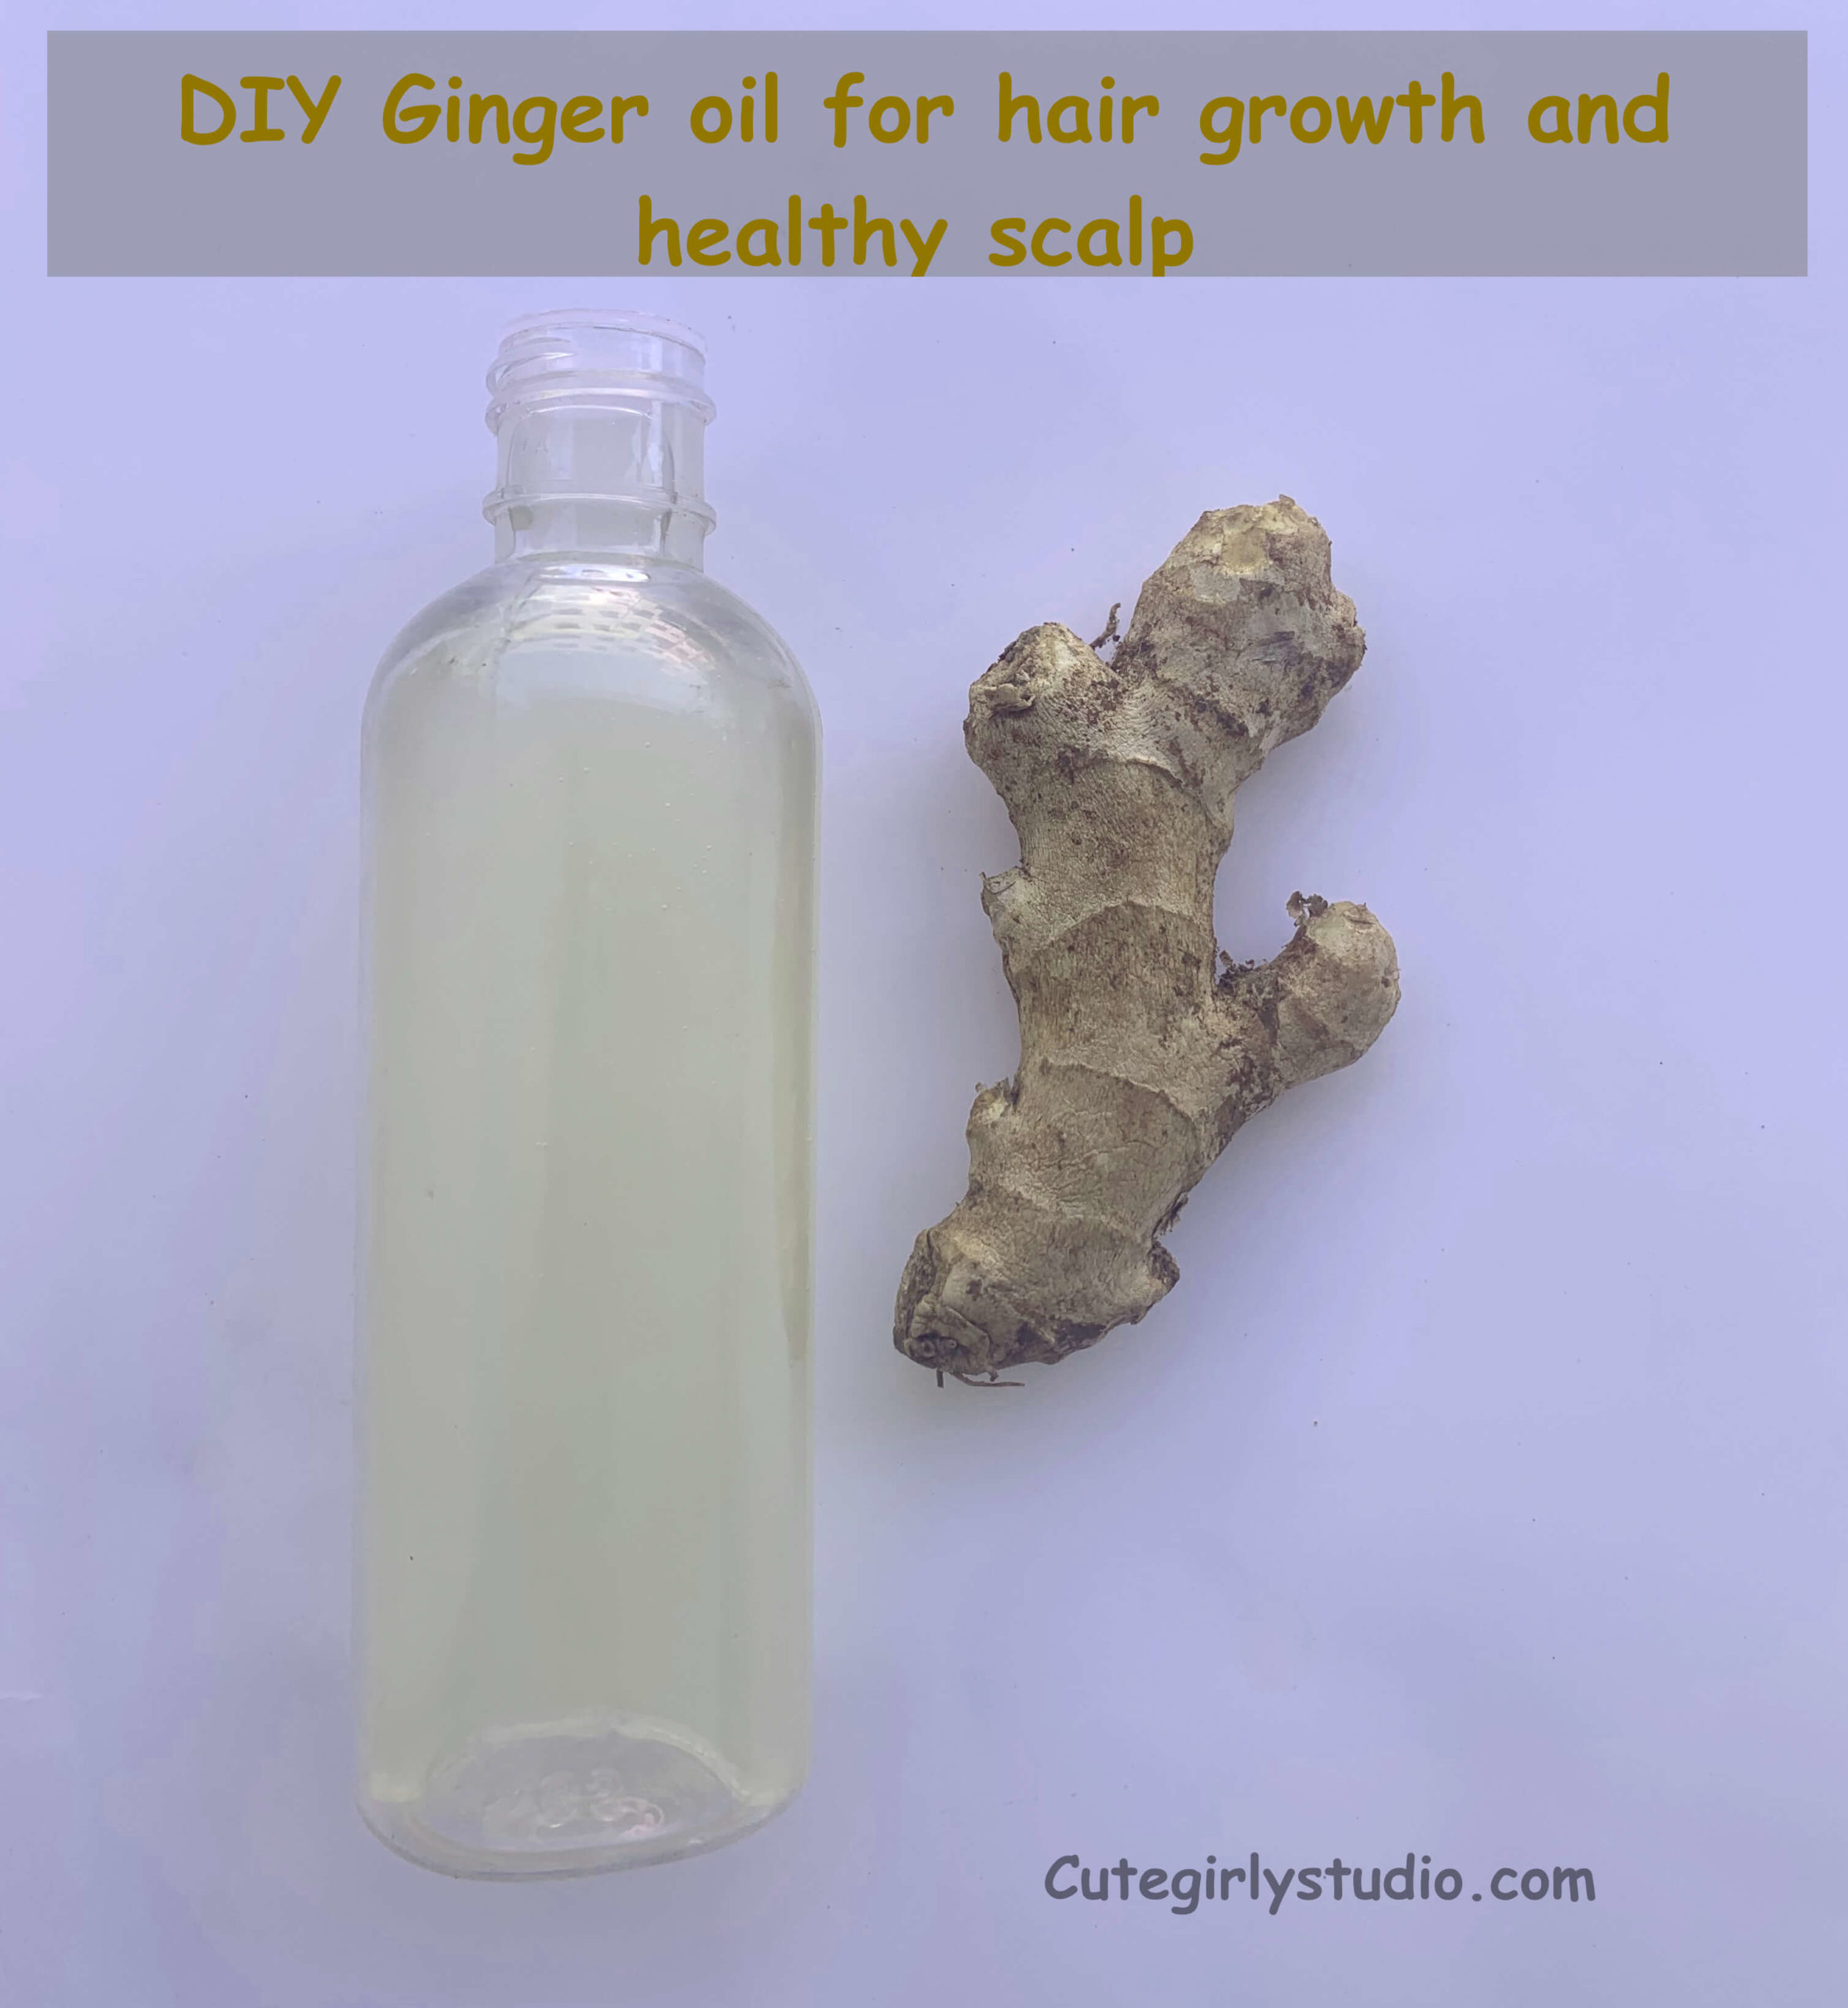 DIY Ginger oil for hair growth and healthy scalp | Cute Girly Studio